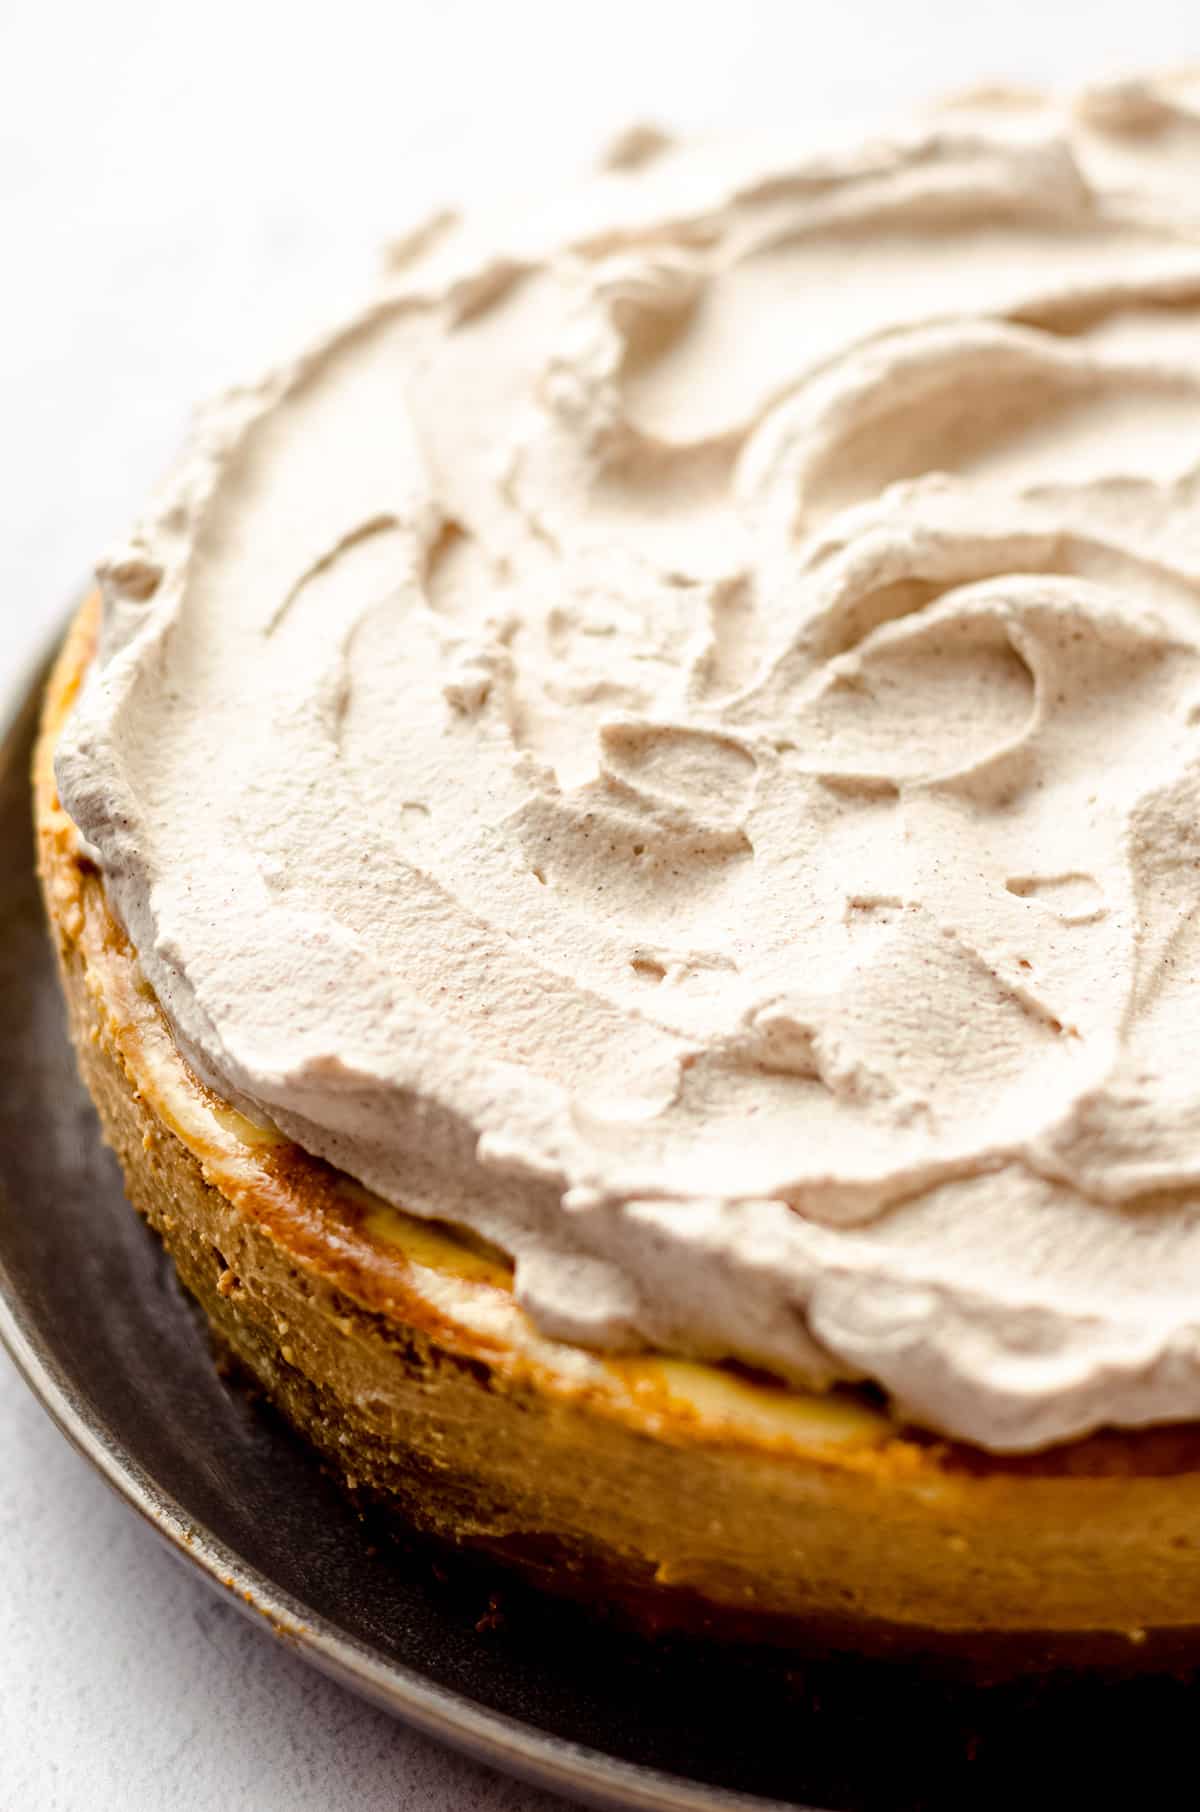 A baked cheesecake with a whipped cream topping.